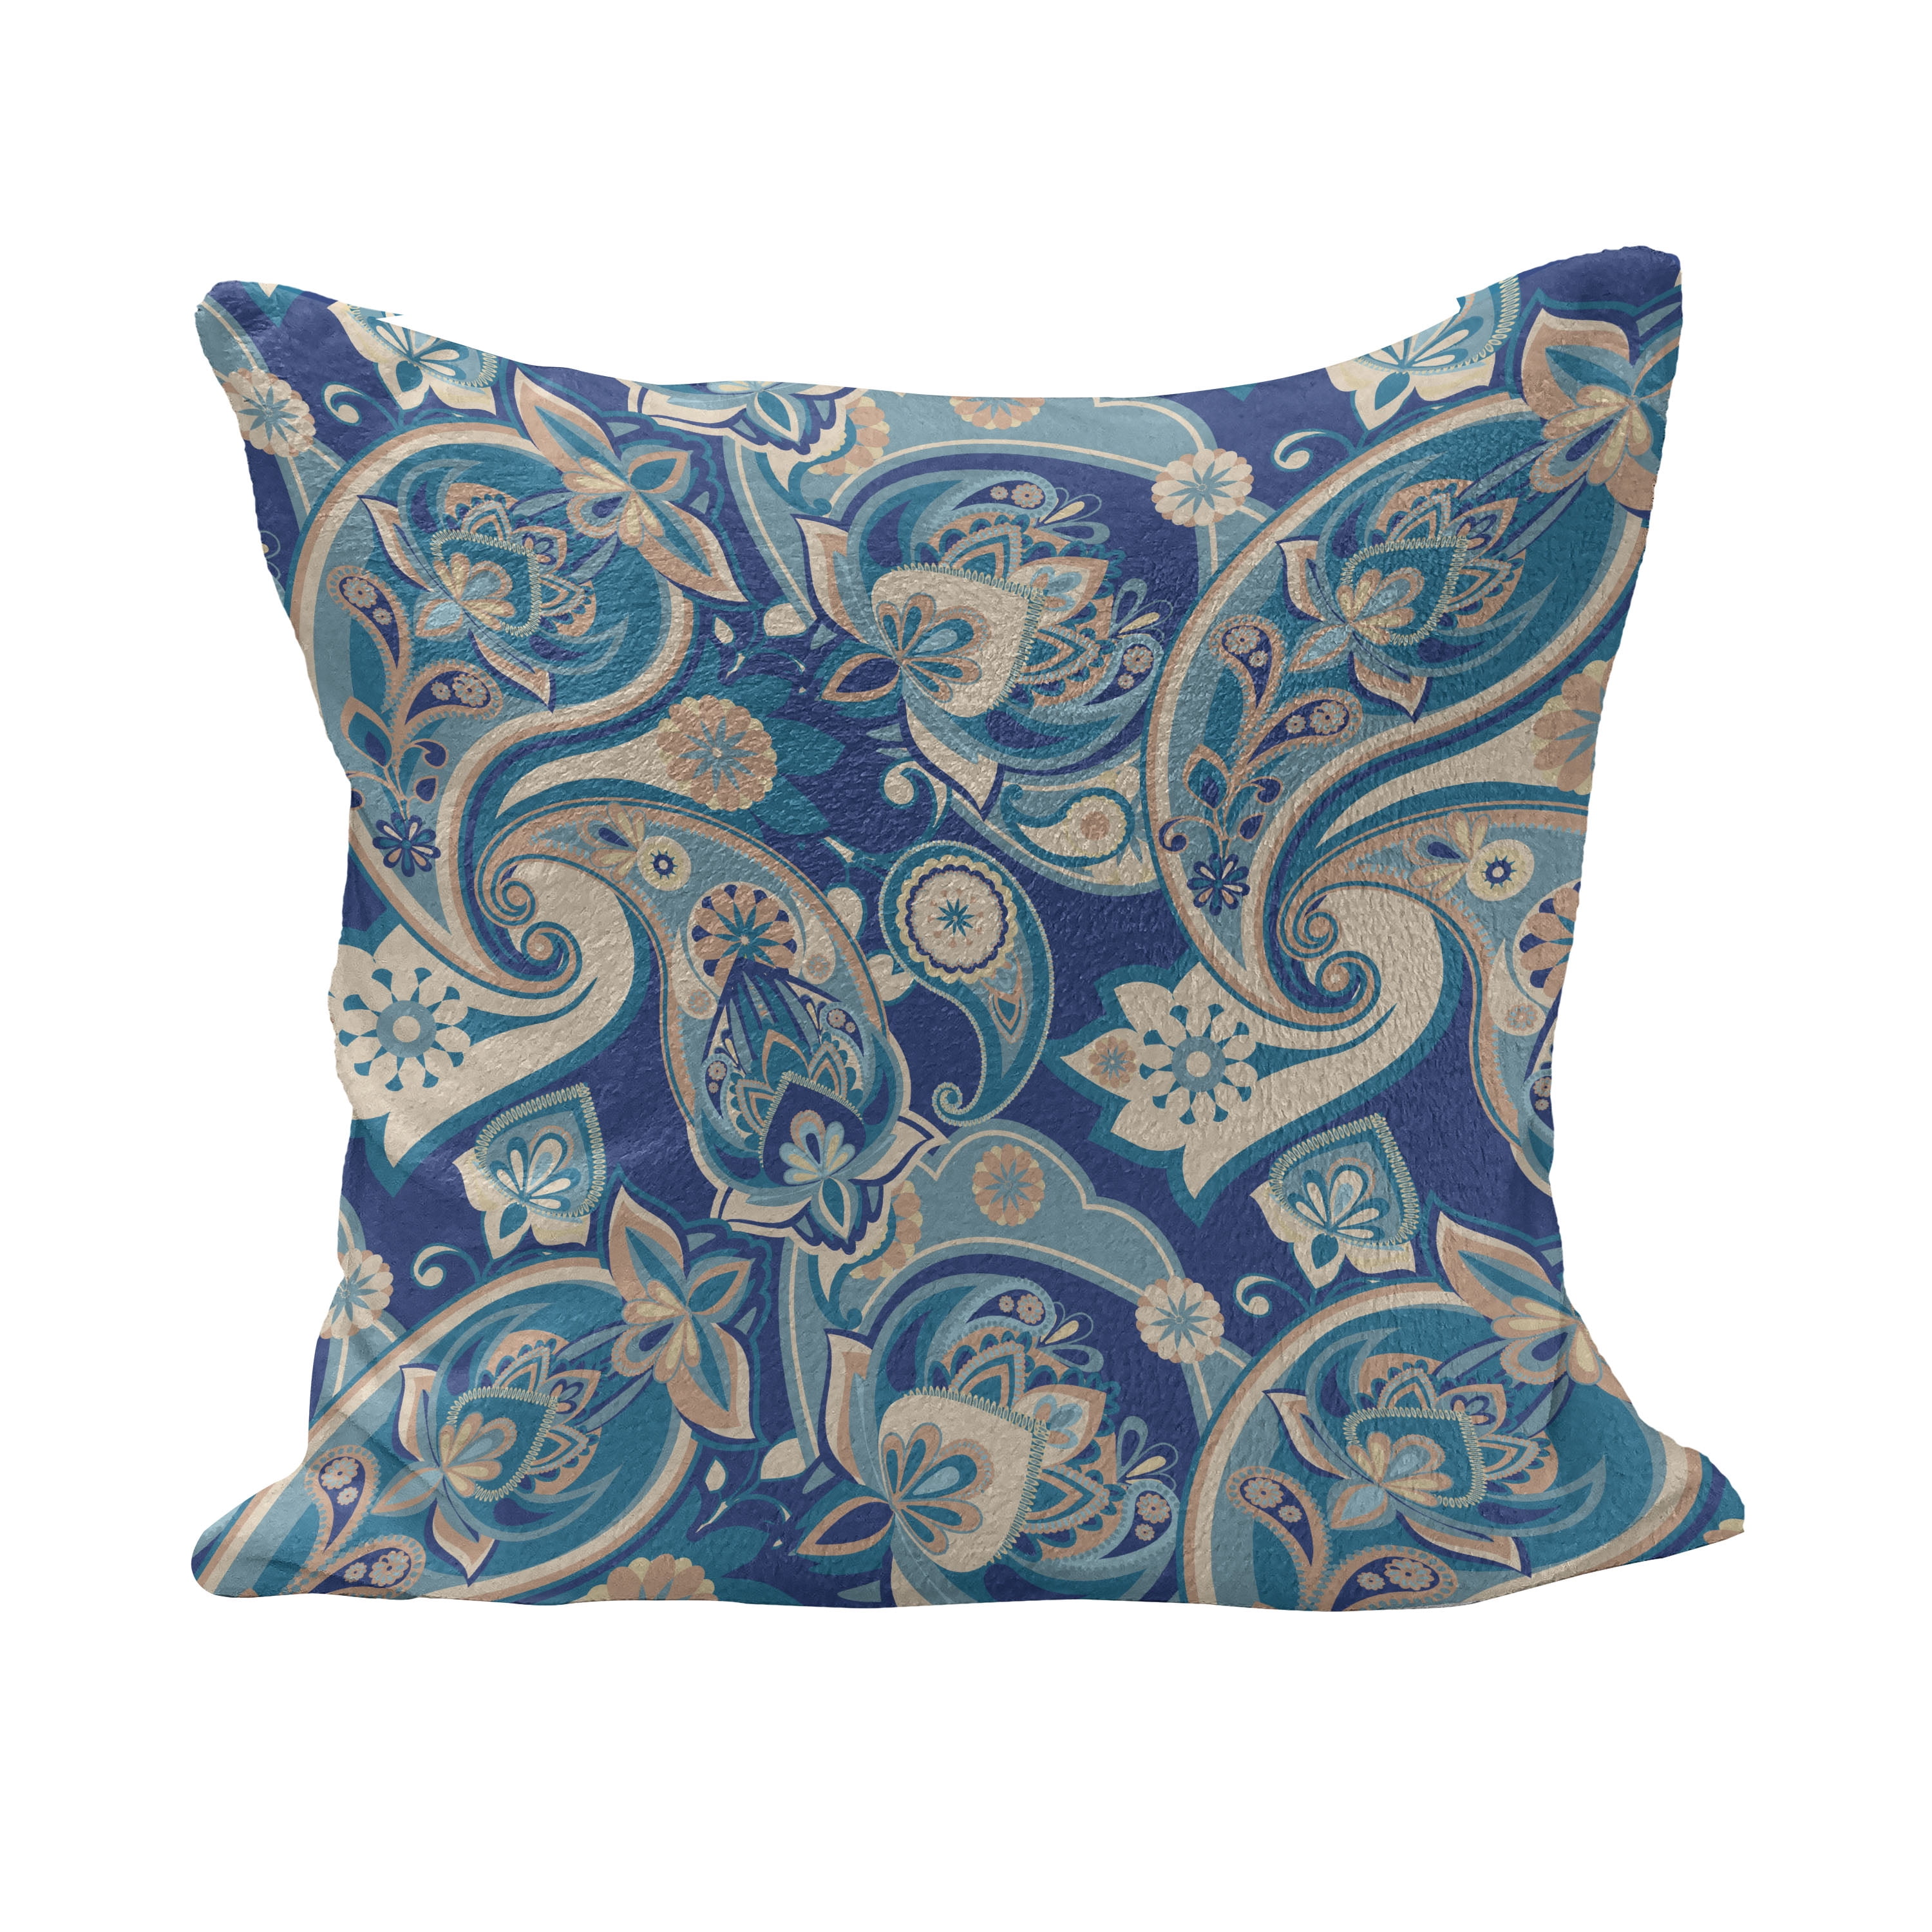 Decorative Square Accent Pillow Case Teal Navy 16 X 16 Ambesonne Paisley Throw Pillow Cushion Cover Inspired Floral Persian Fashion Boho Art Illustration Print